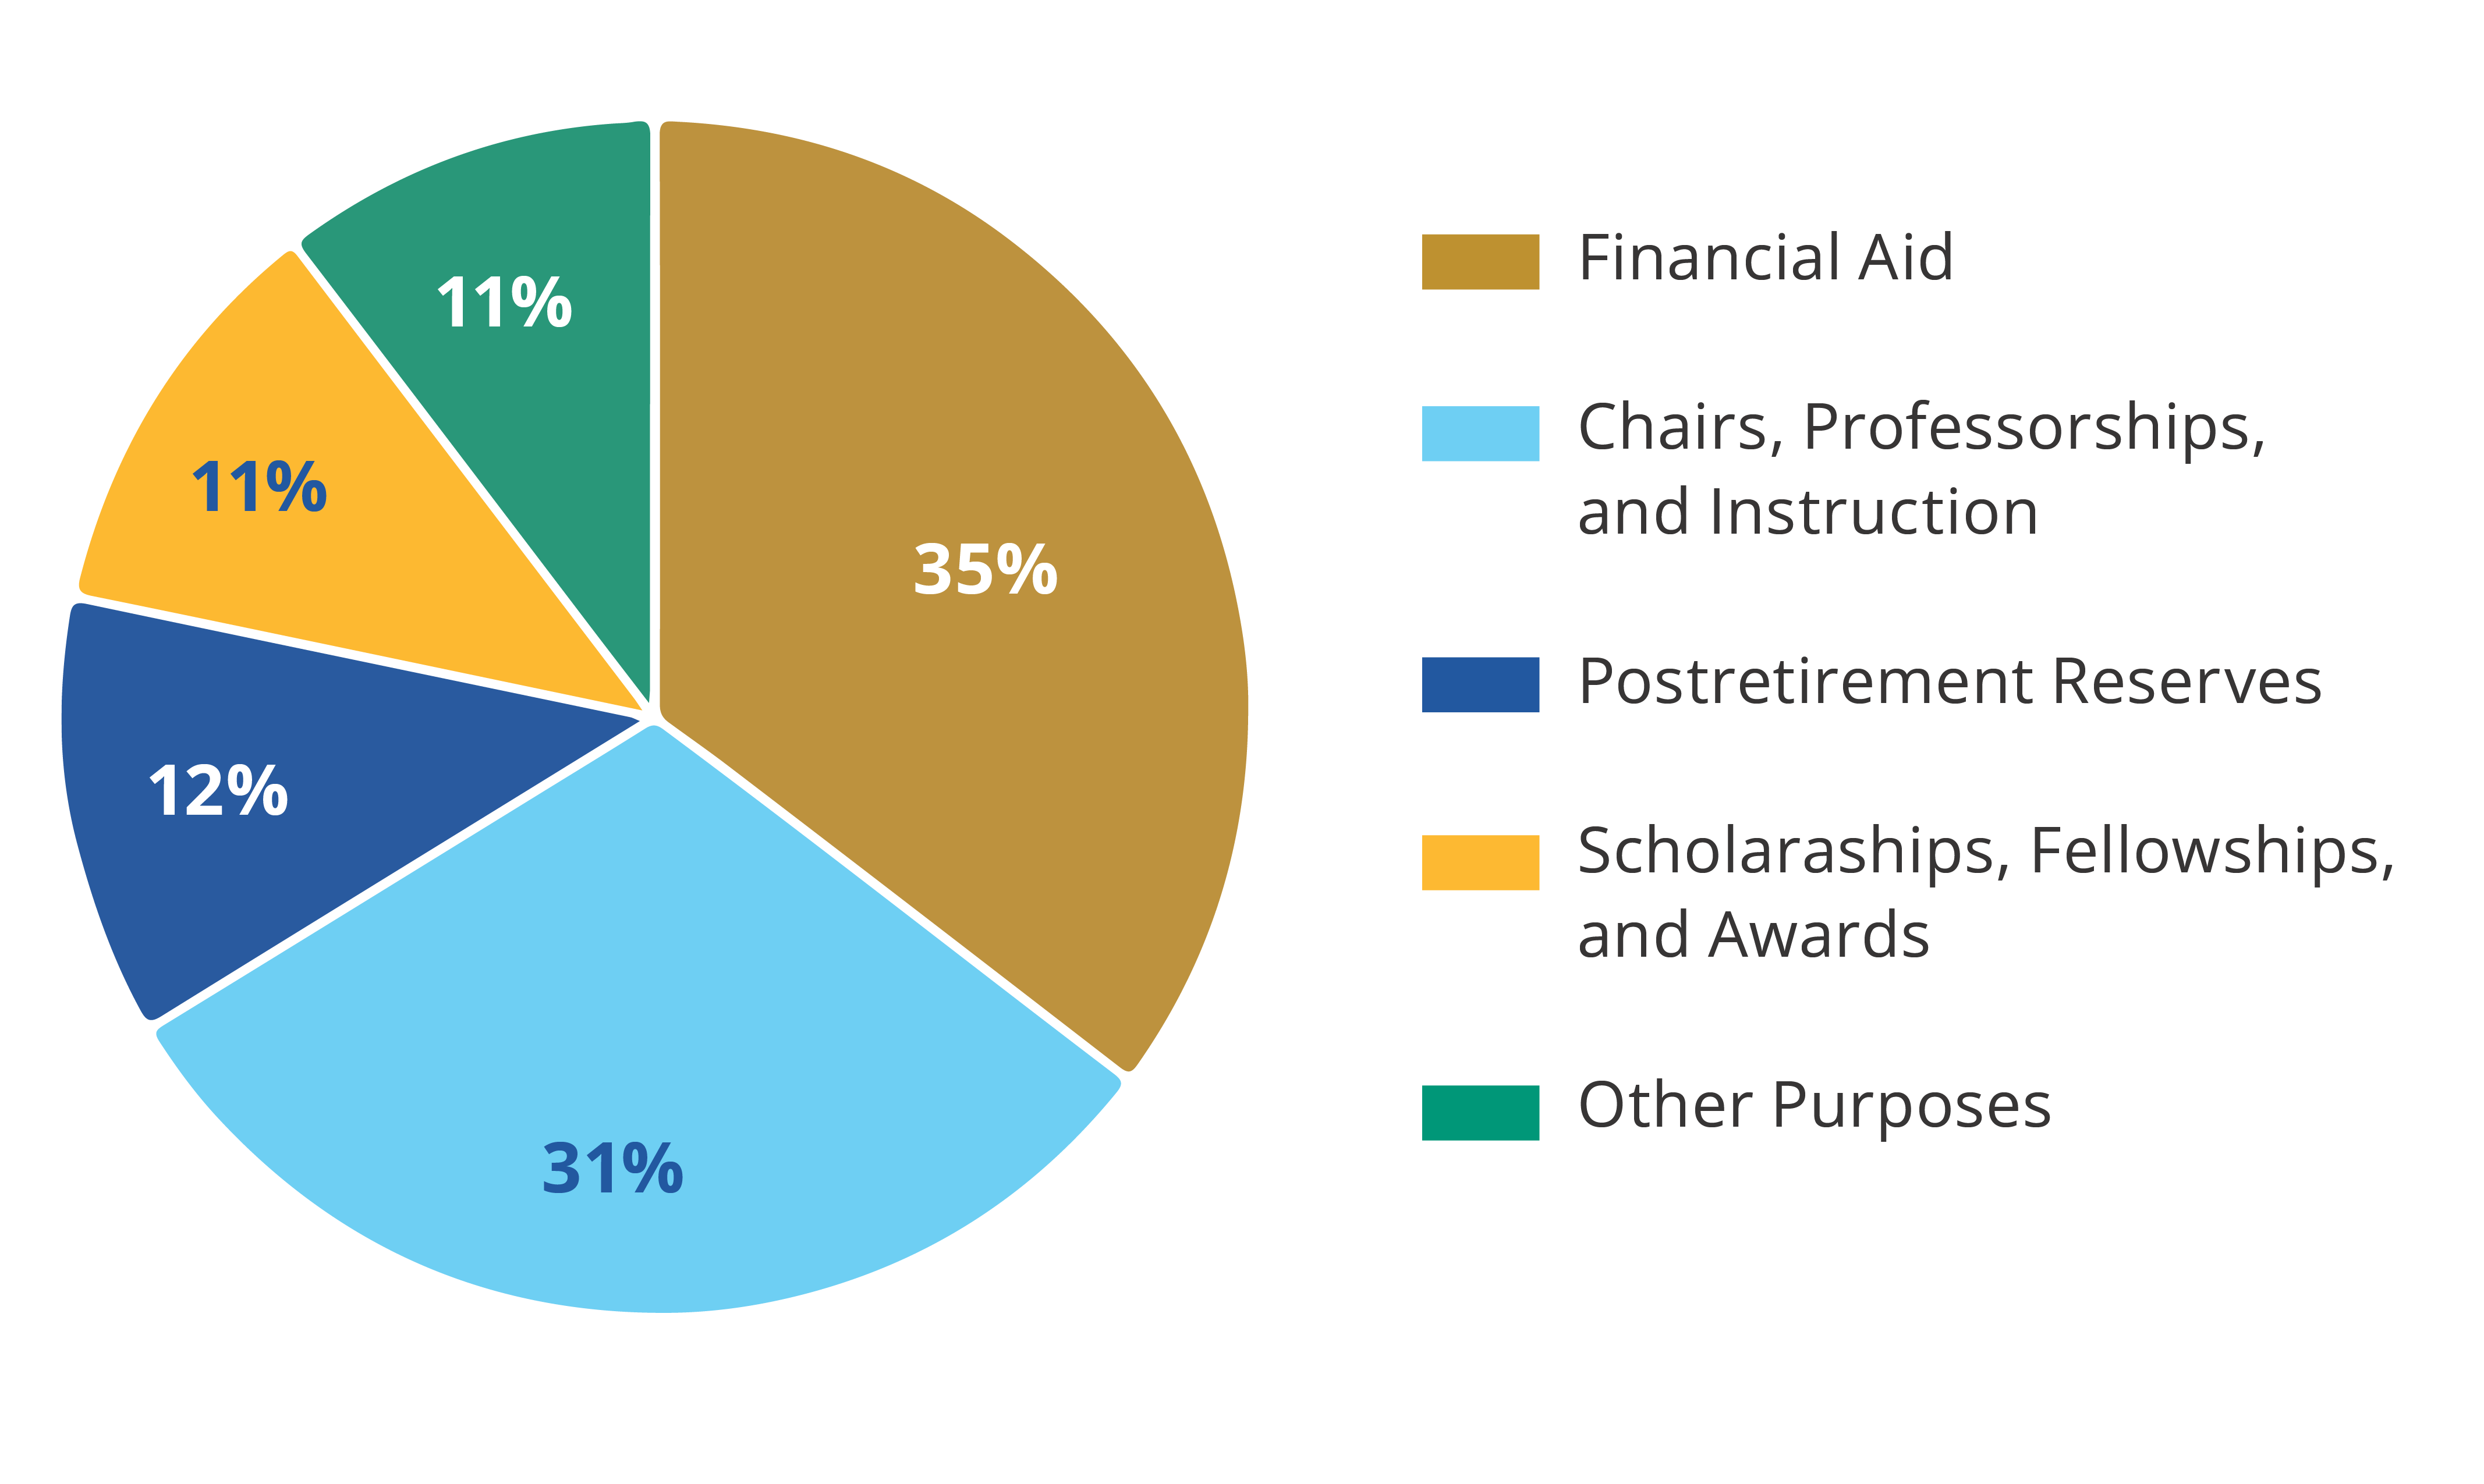 This chart indicates the defined purposes for Pitt’s CEF funds. 